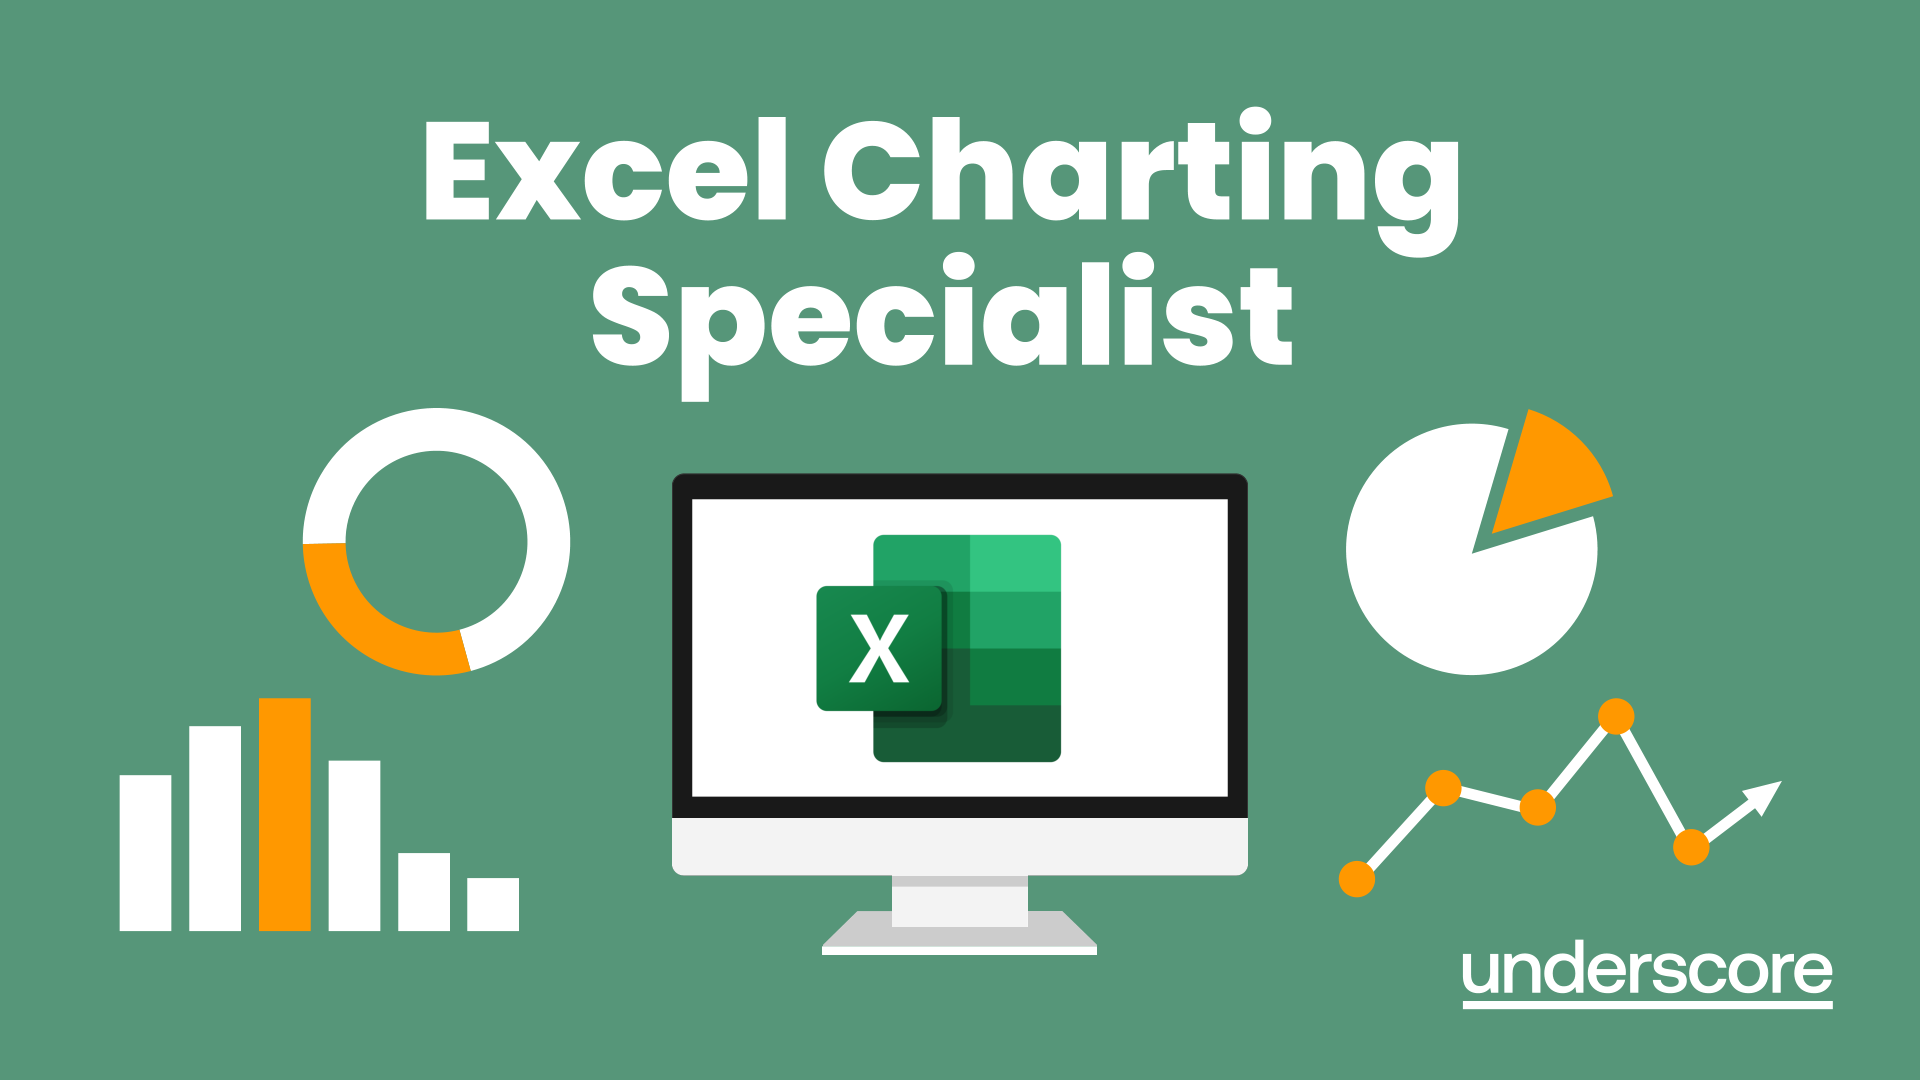 Excel Charting Specialist